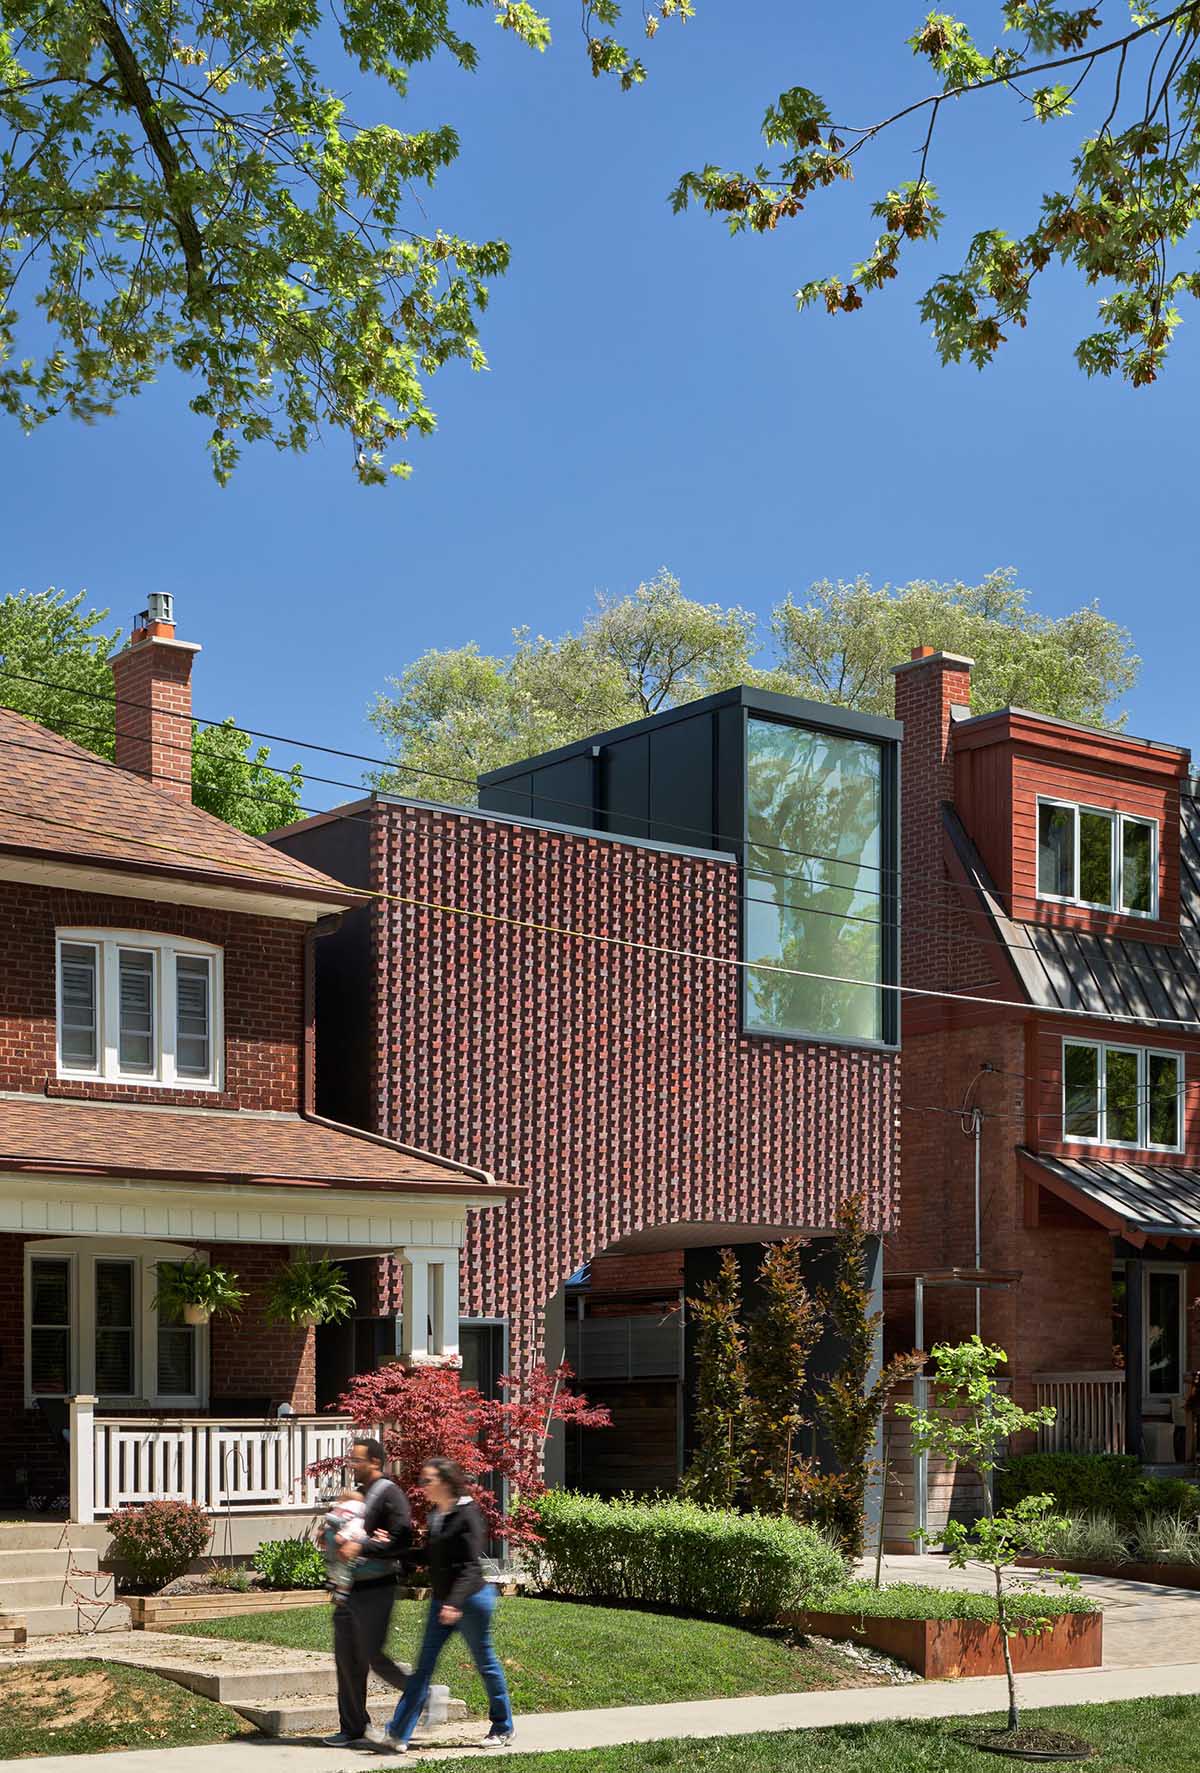 The brickwork that covers the facade and wraps the ceiling and walls of the carport of this modern house plays into Toronto’s history of masonry detailing.